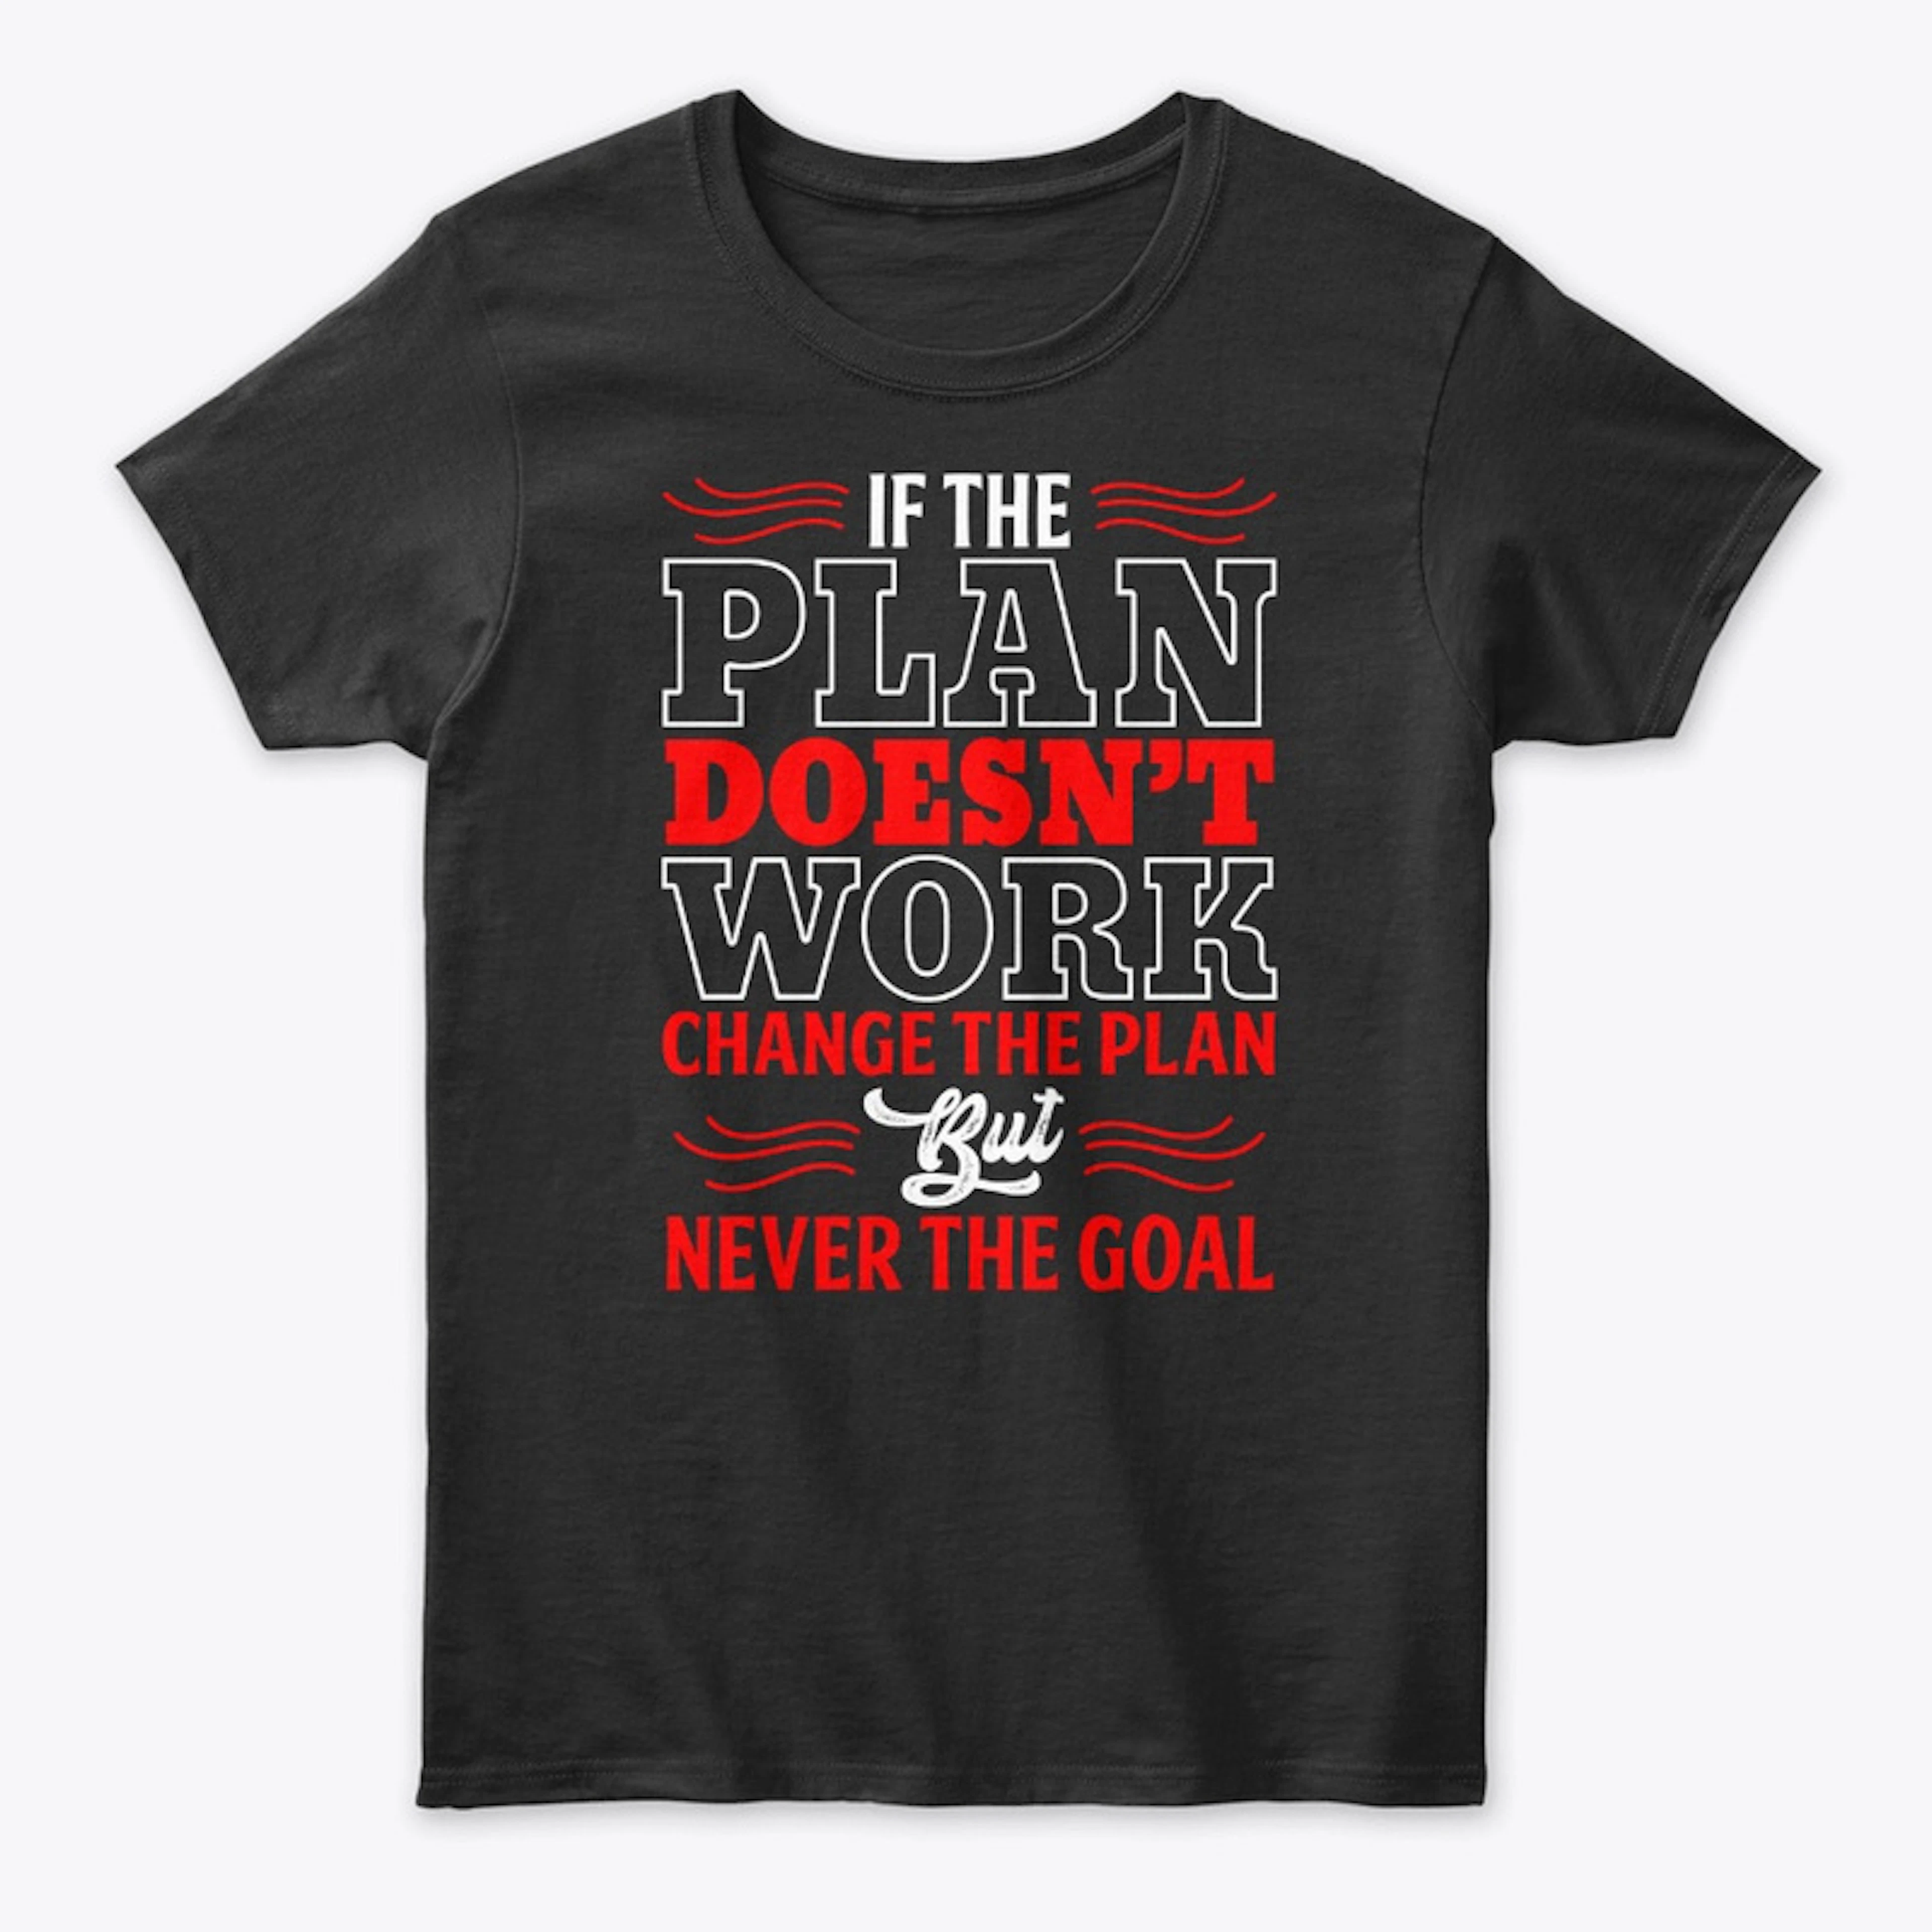 If the plan don't work Tee